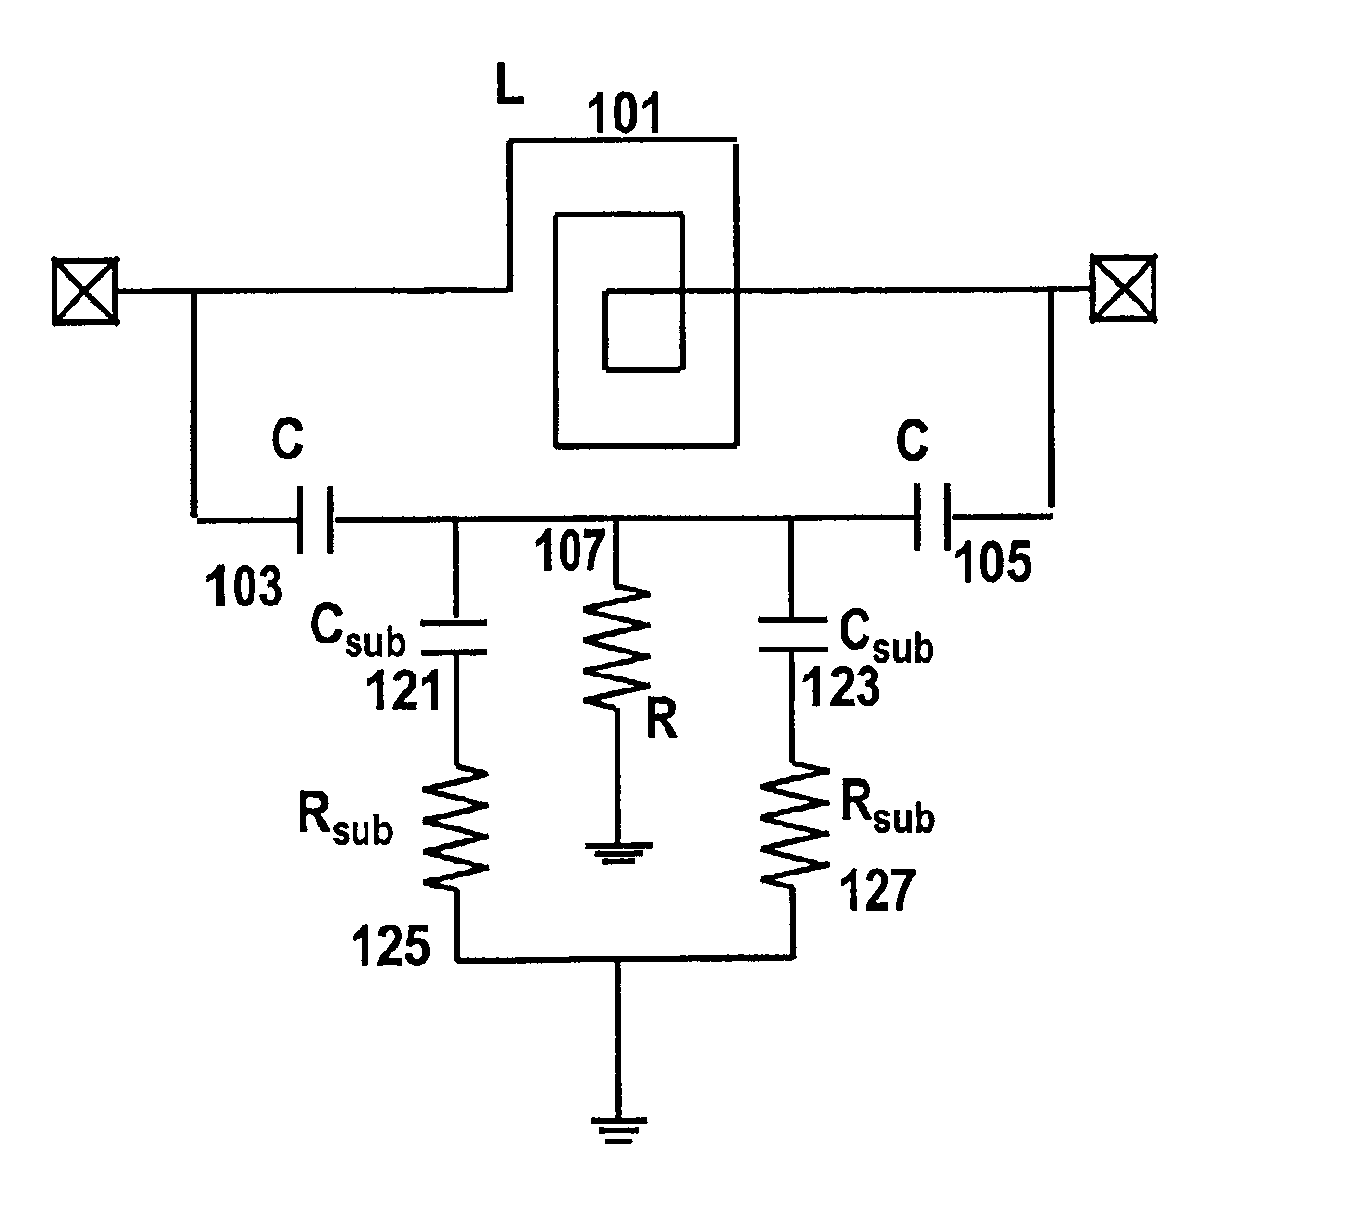 Filters implemented in integrated circuits